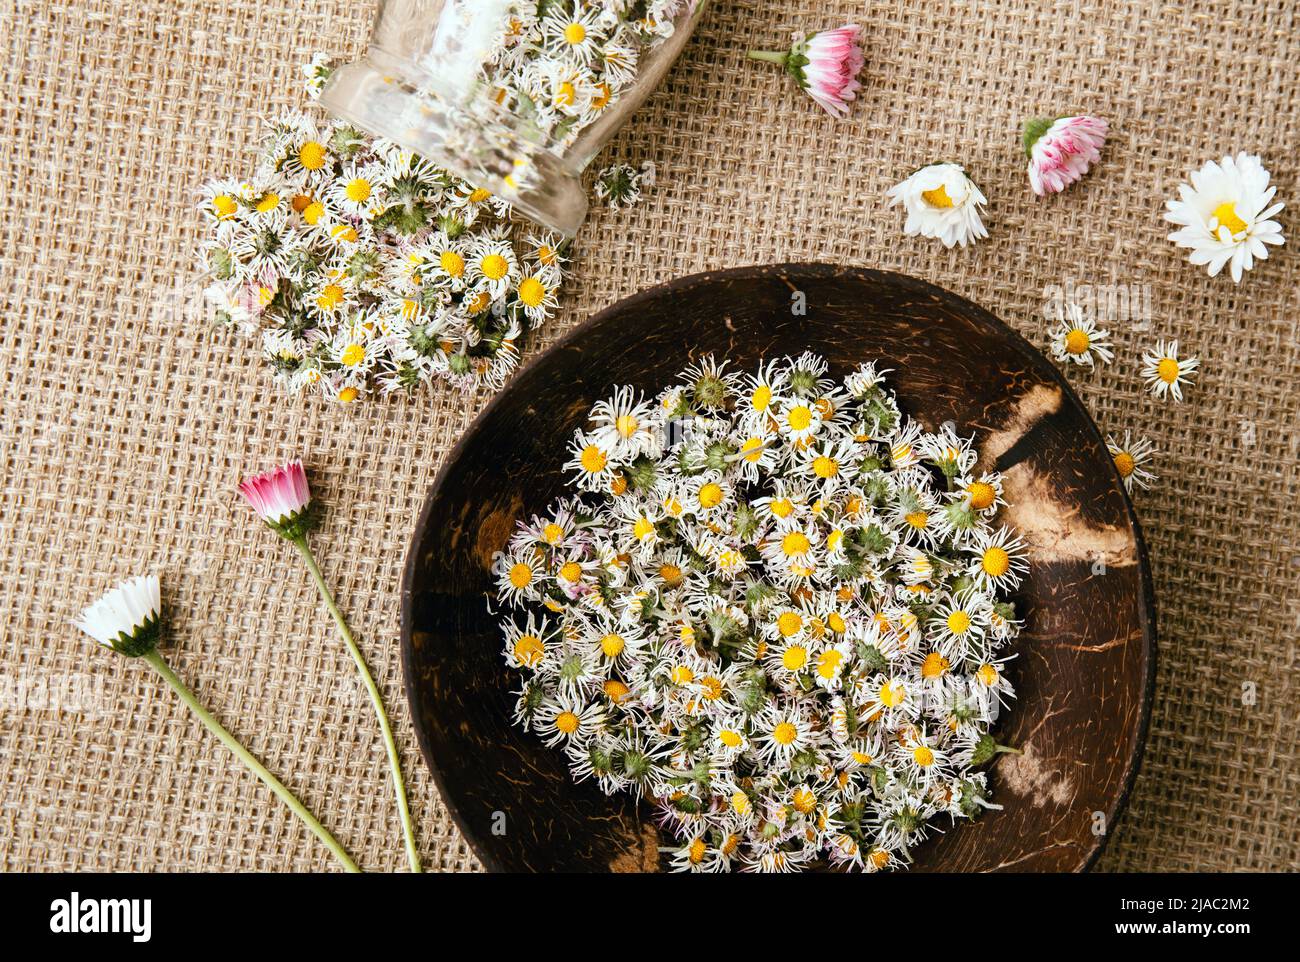 Dried herbal medicinal plant Common Daisy, also known as Bellis Perennis. Dry flower blossoms in glass jar and wood bowl, ready for making herbal tea. Stock Photo